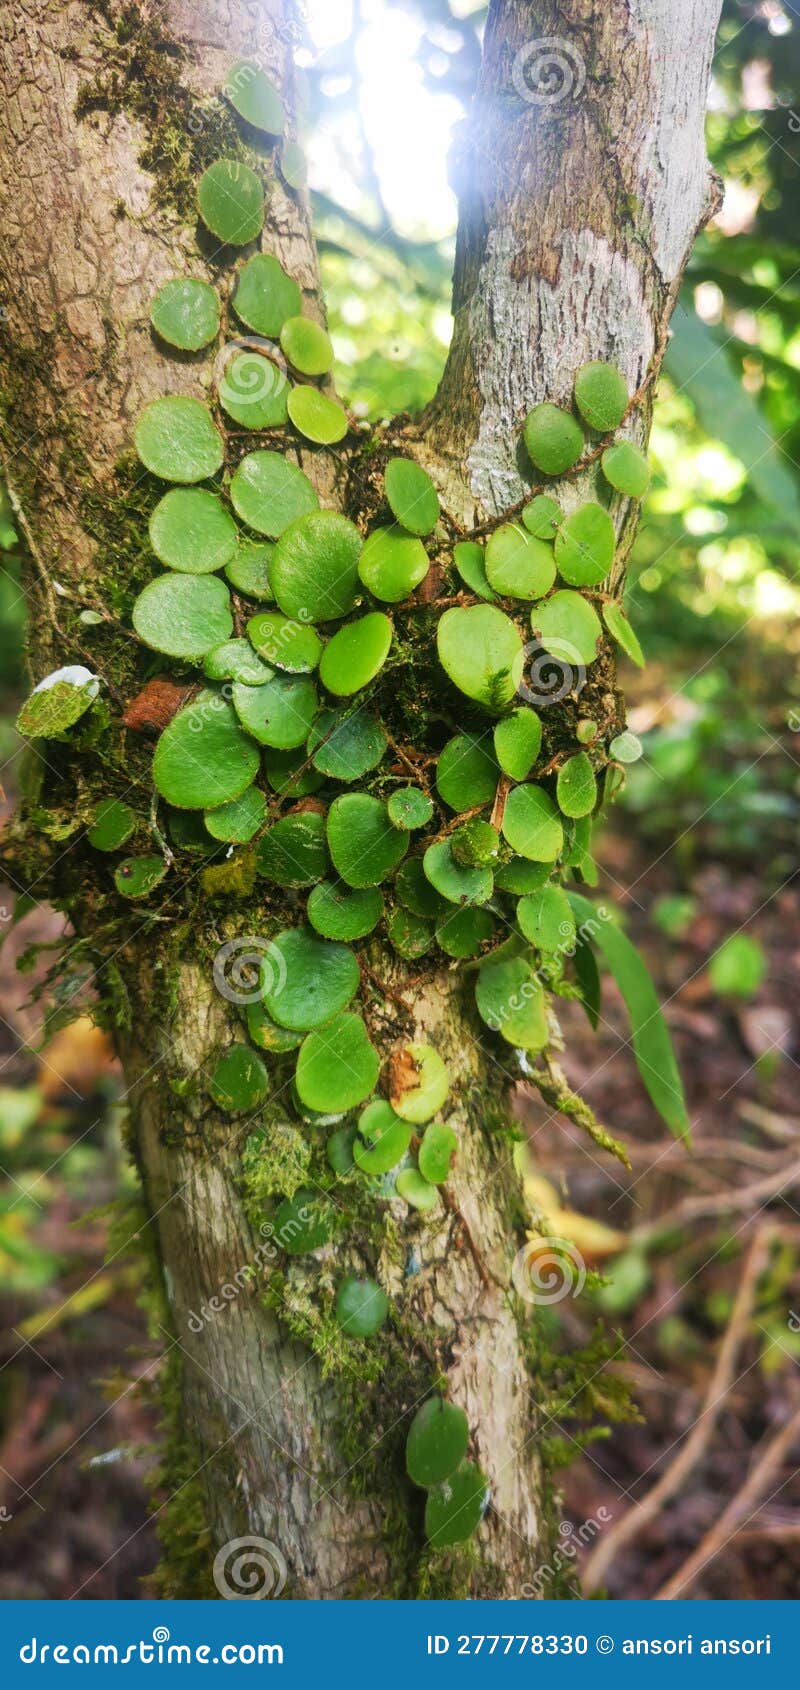 parasite that reside on trees, plants in the forest